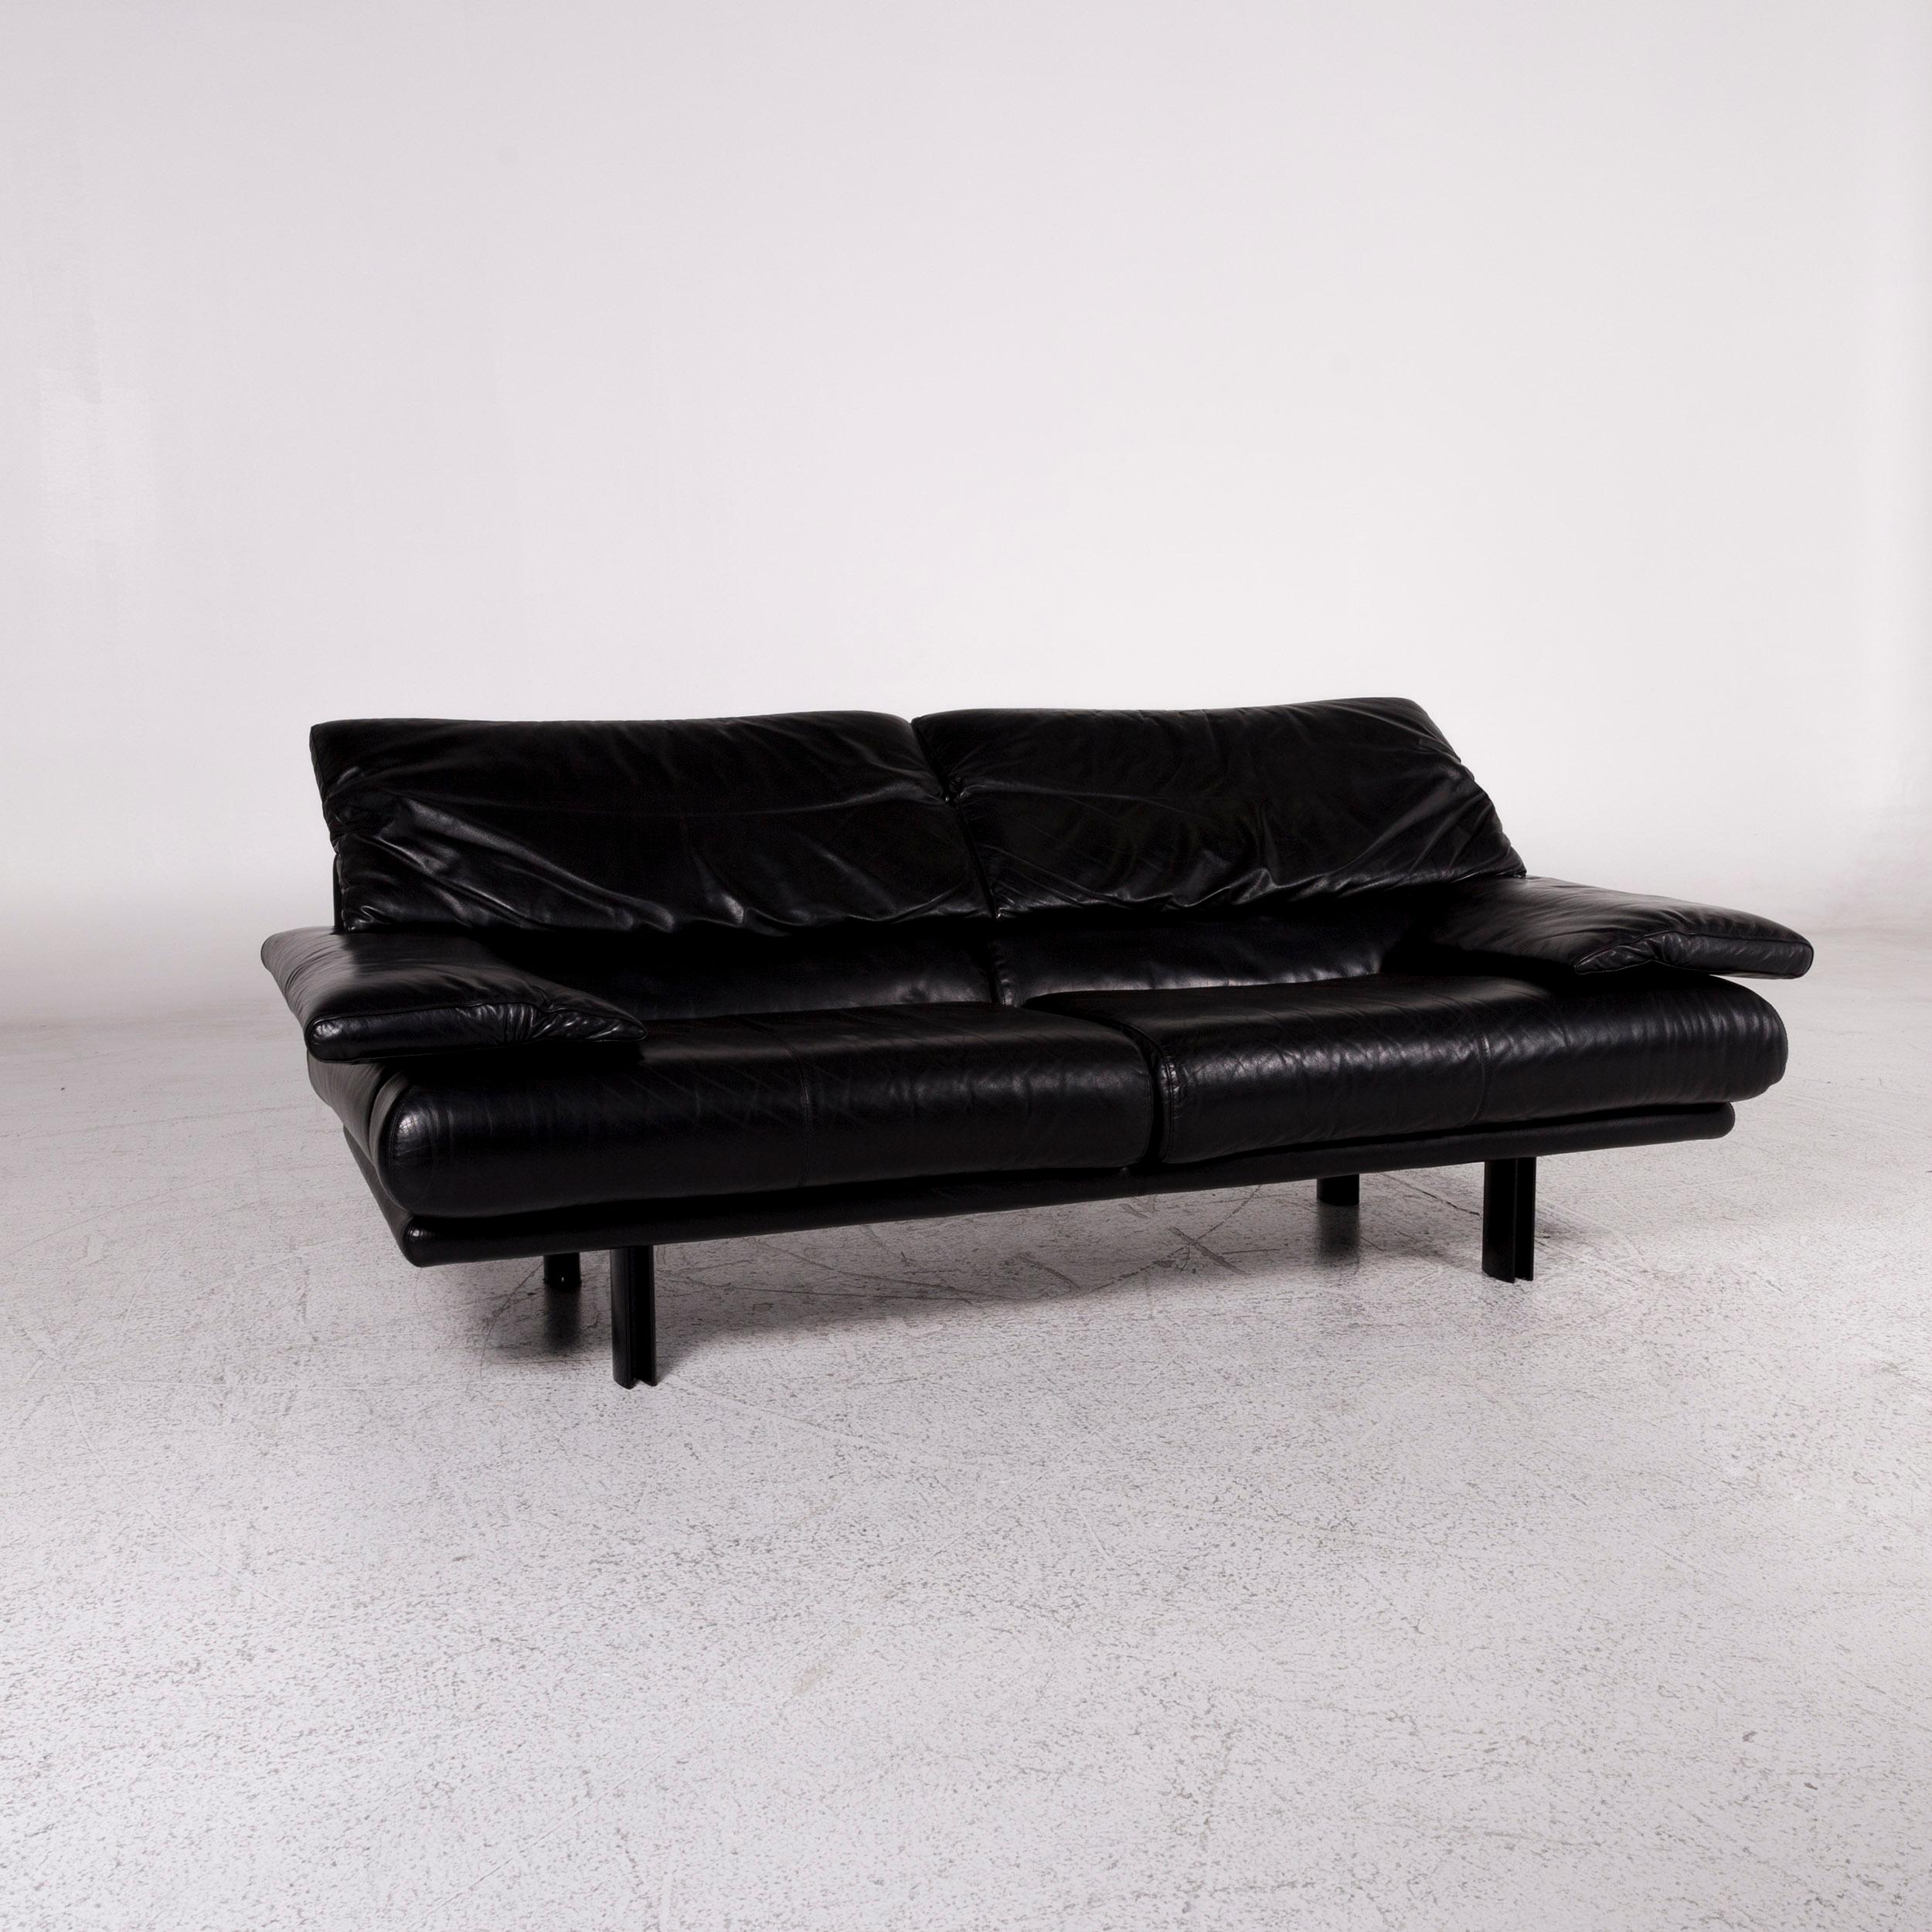 We bring to you a B & B Italia Alanda leather sofa black two-seat function Paolo Piva couch.

 
 Product measurements in centimeters:
 
 Depth 90
Width 210
Height 73
Seat-height 45
Rest-height 53
Seat-depth 56
Seat-width 128
Back-height